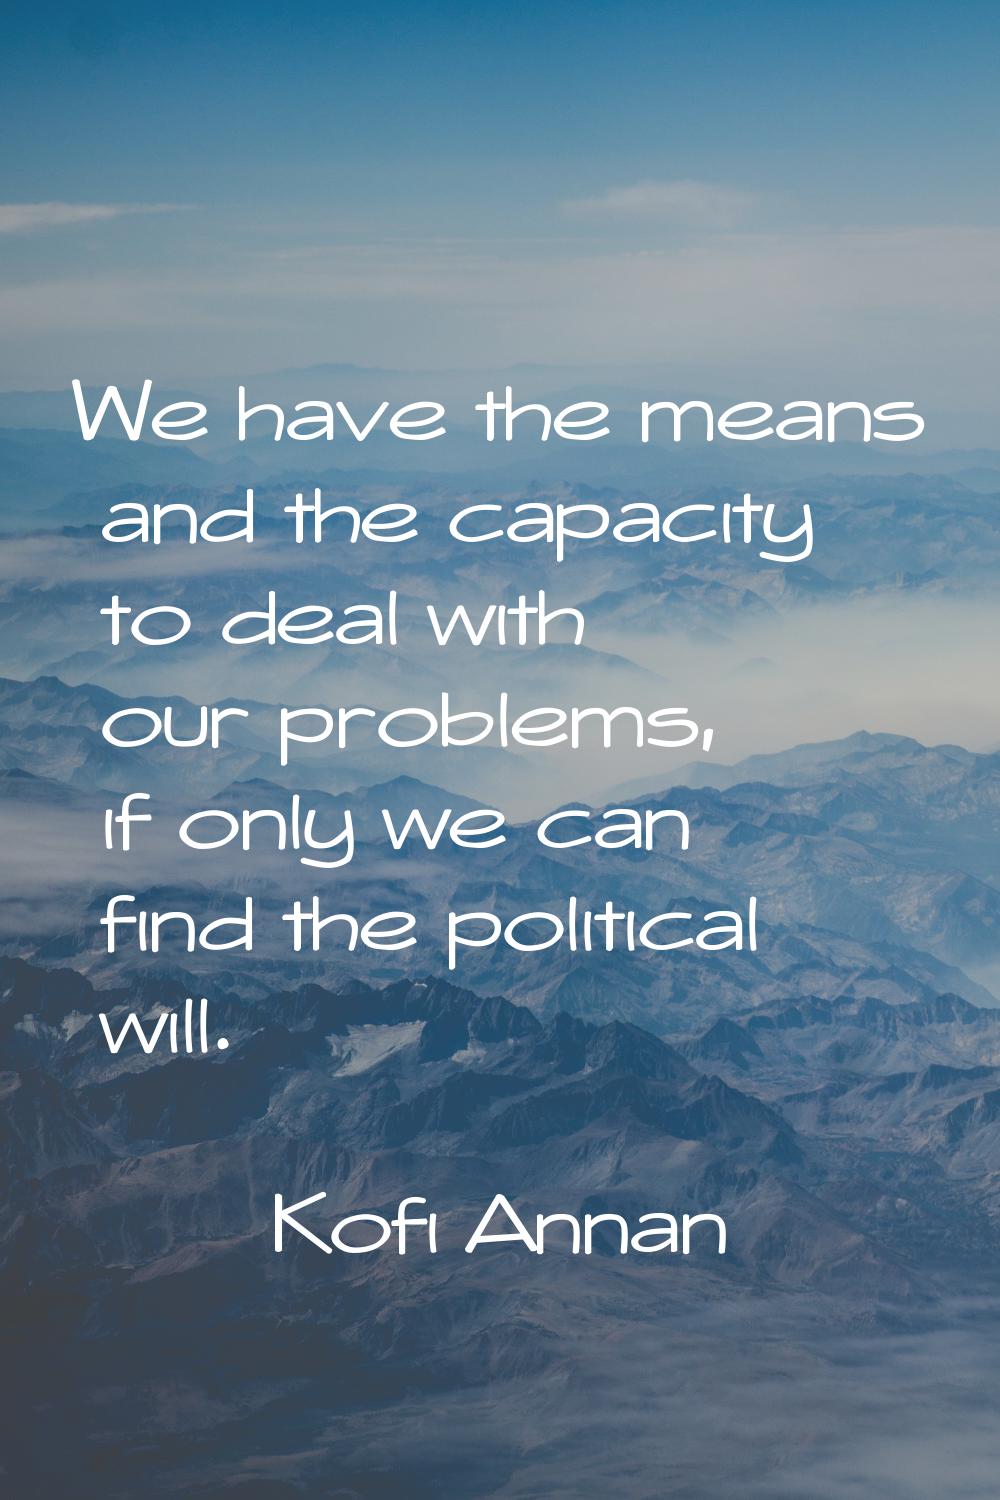 We have the means and the capacity to deal with our problems, if only we can find the political wil